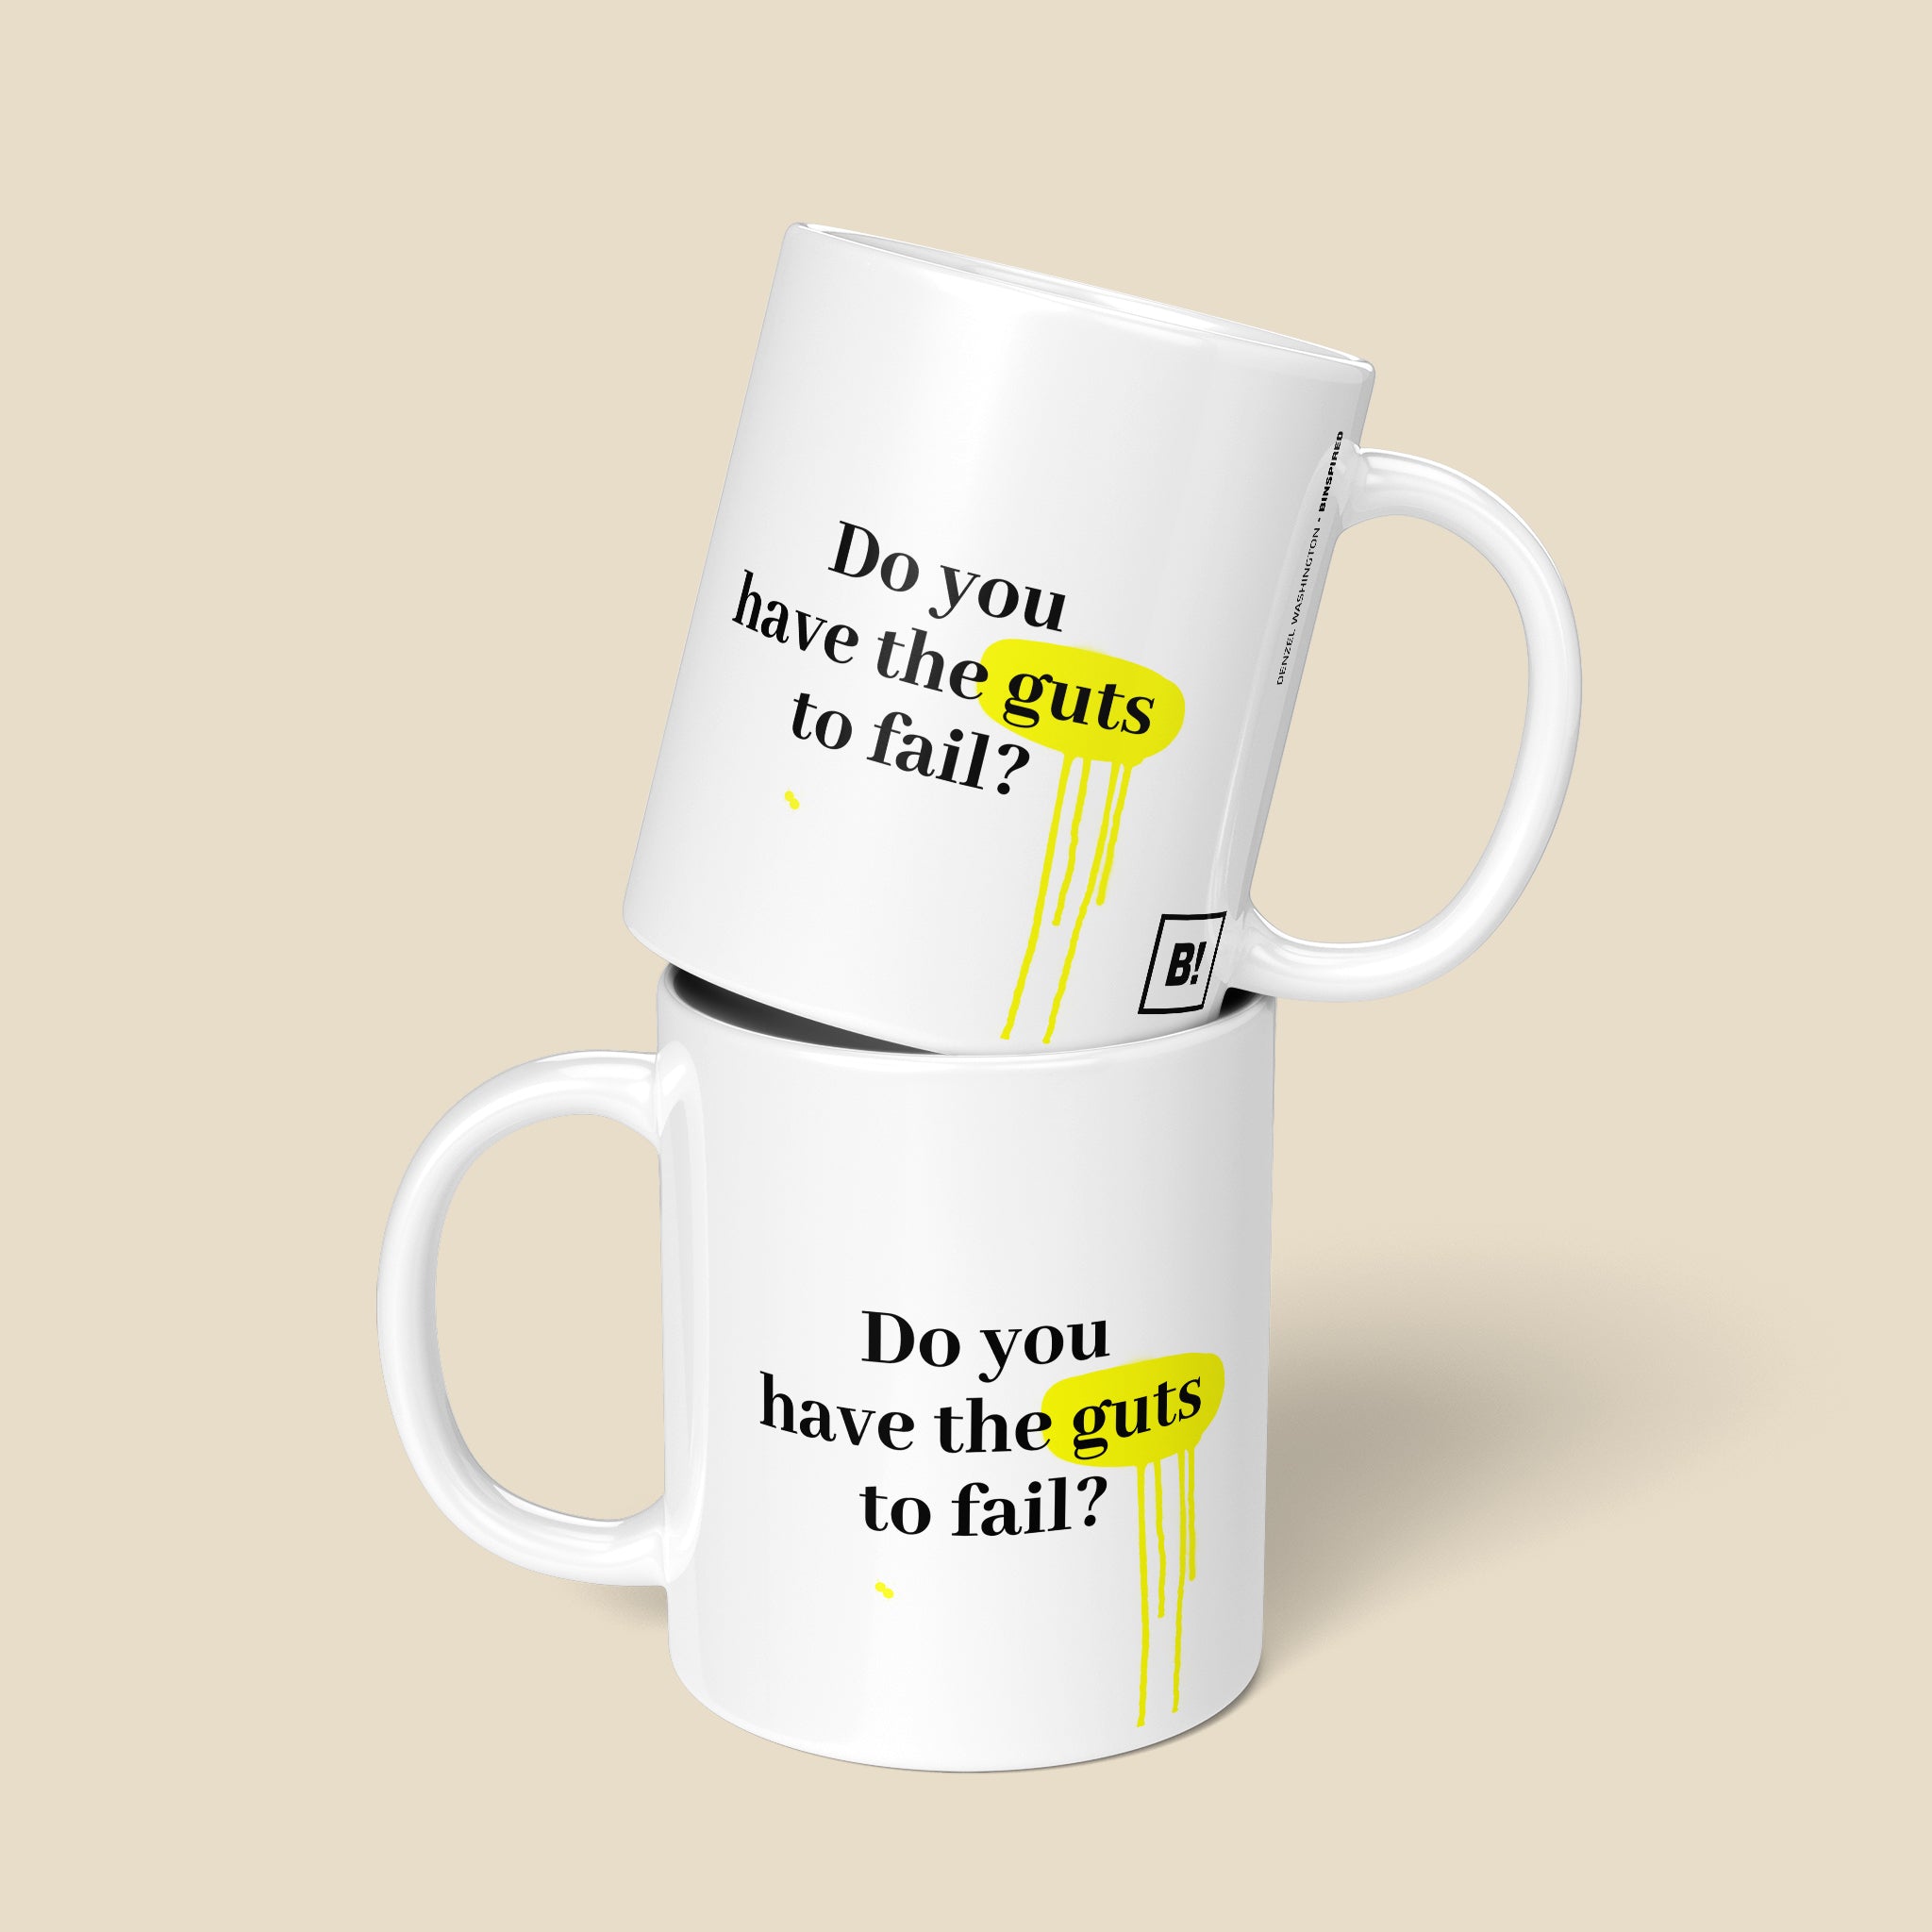 Be inspired by Denzel Washington's famous quote, "Do you have the guts to fail?" on this 11oz white glossy coffee mug with a front and back view.